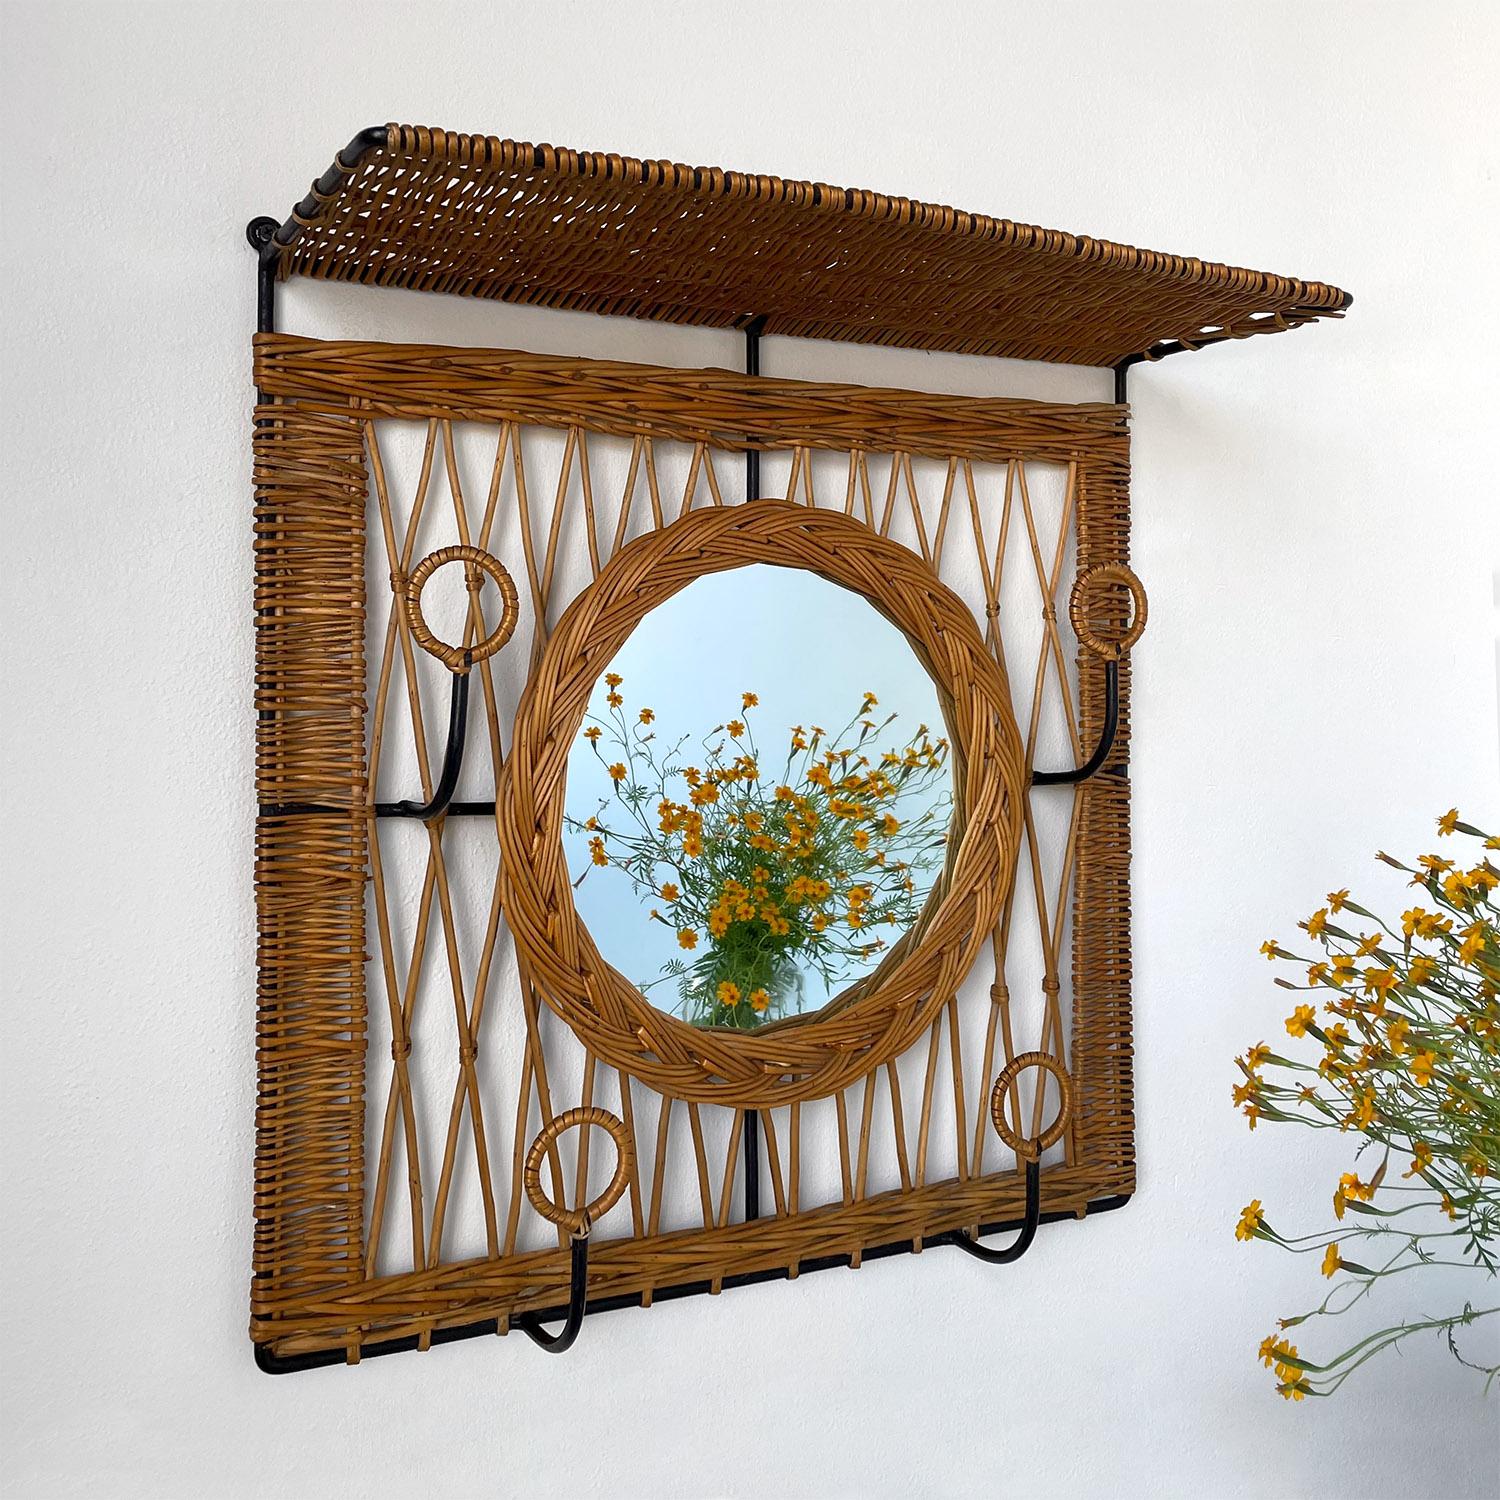 Jacques Adnet style wicker and iron mirrored coat rack
France, circa 1950s
Beautiful entry piece
Intricately woven willow delicately wraps iron frame
Longer willow reeds create a crisscross patterned backdrop
Braided willow framed mirror
Four